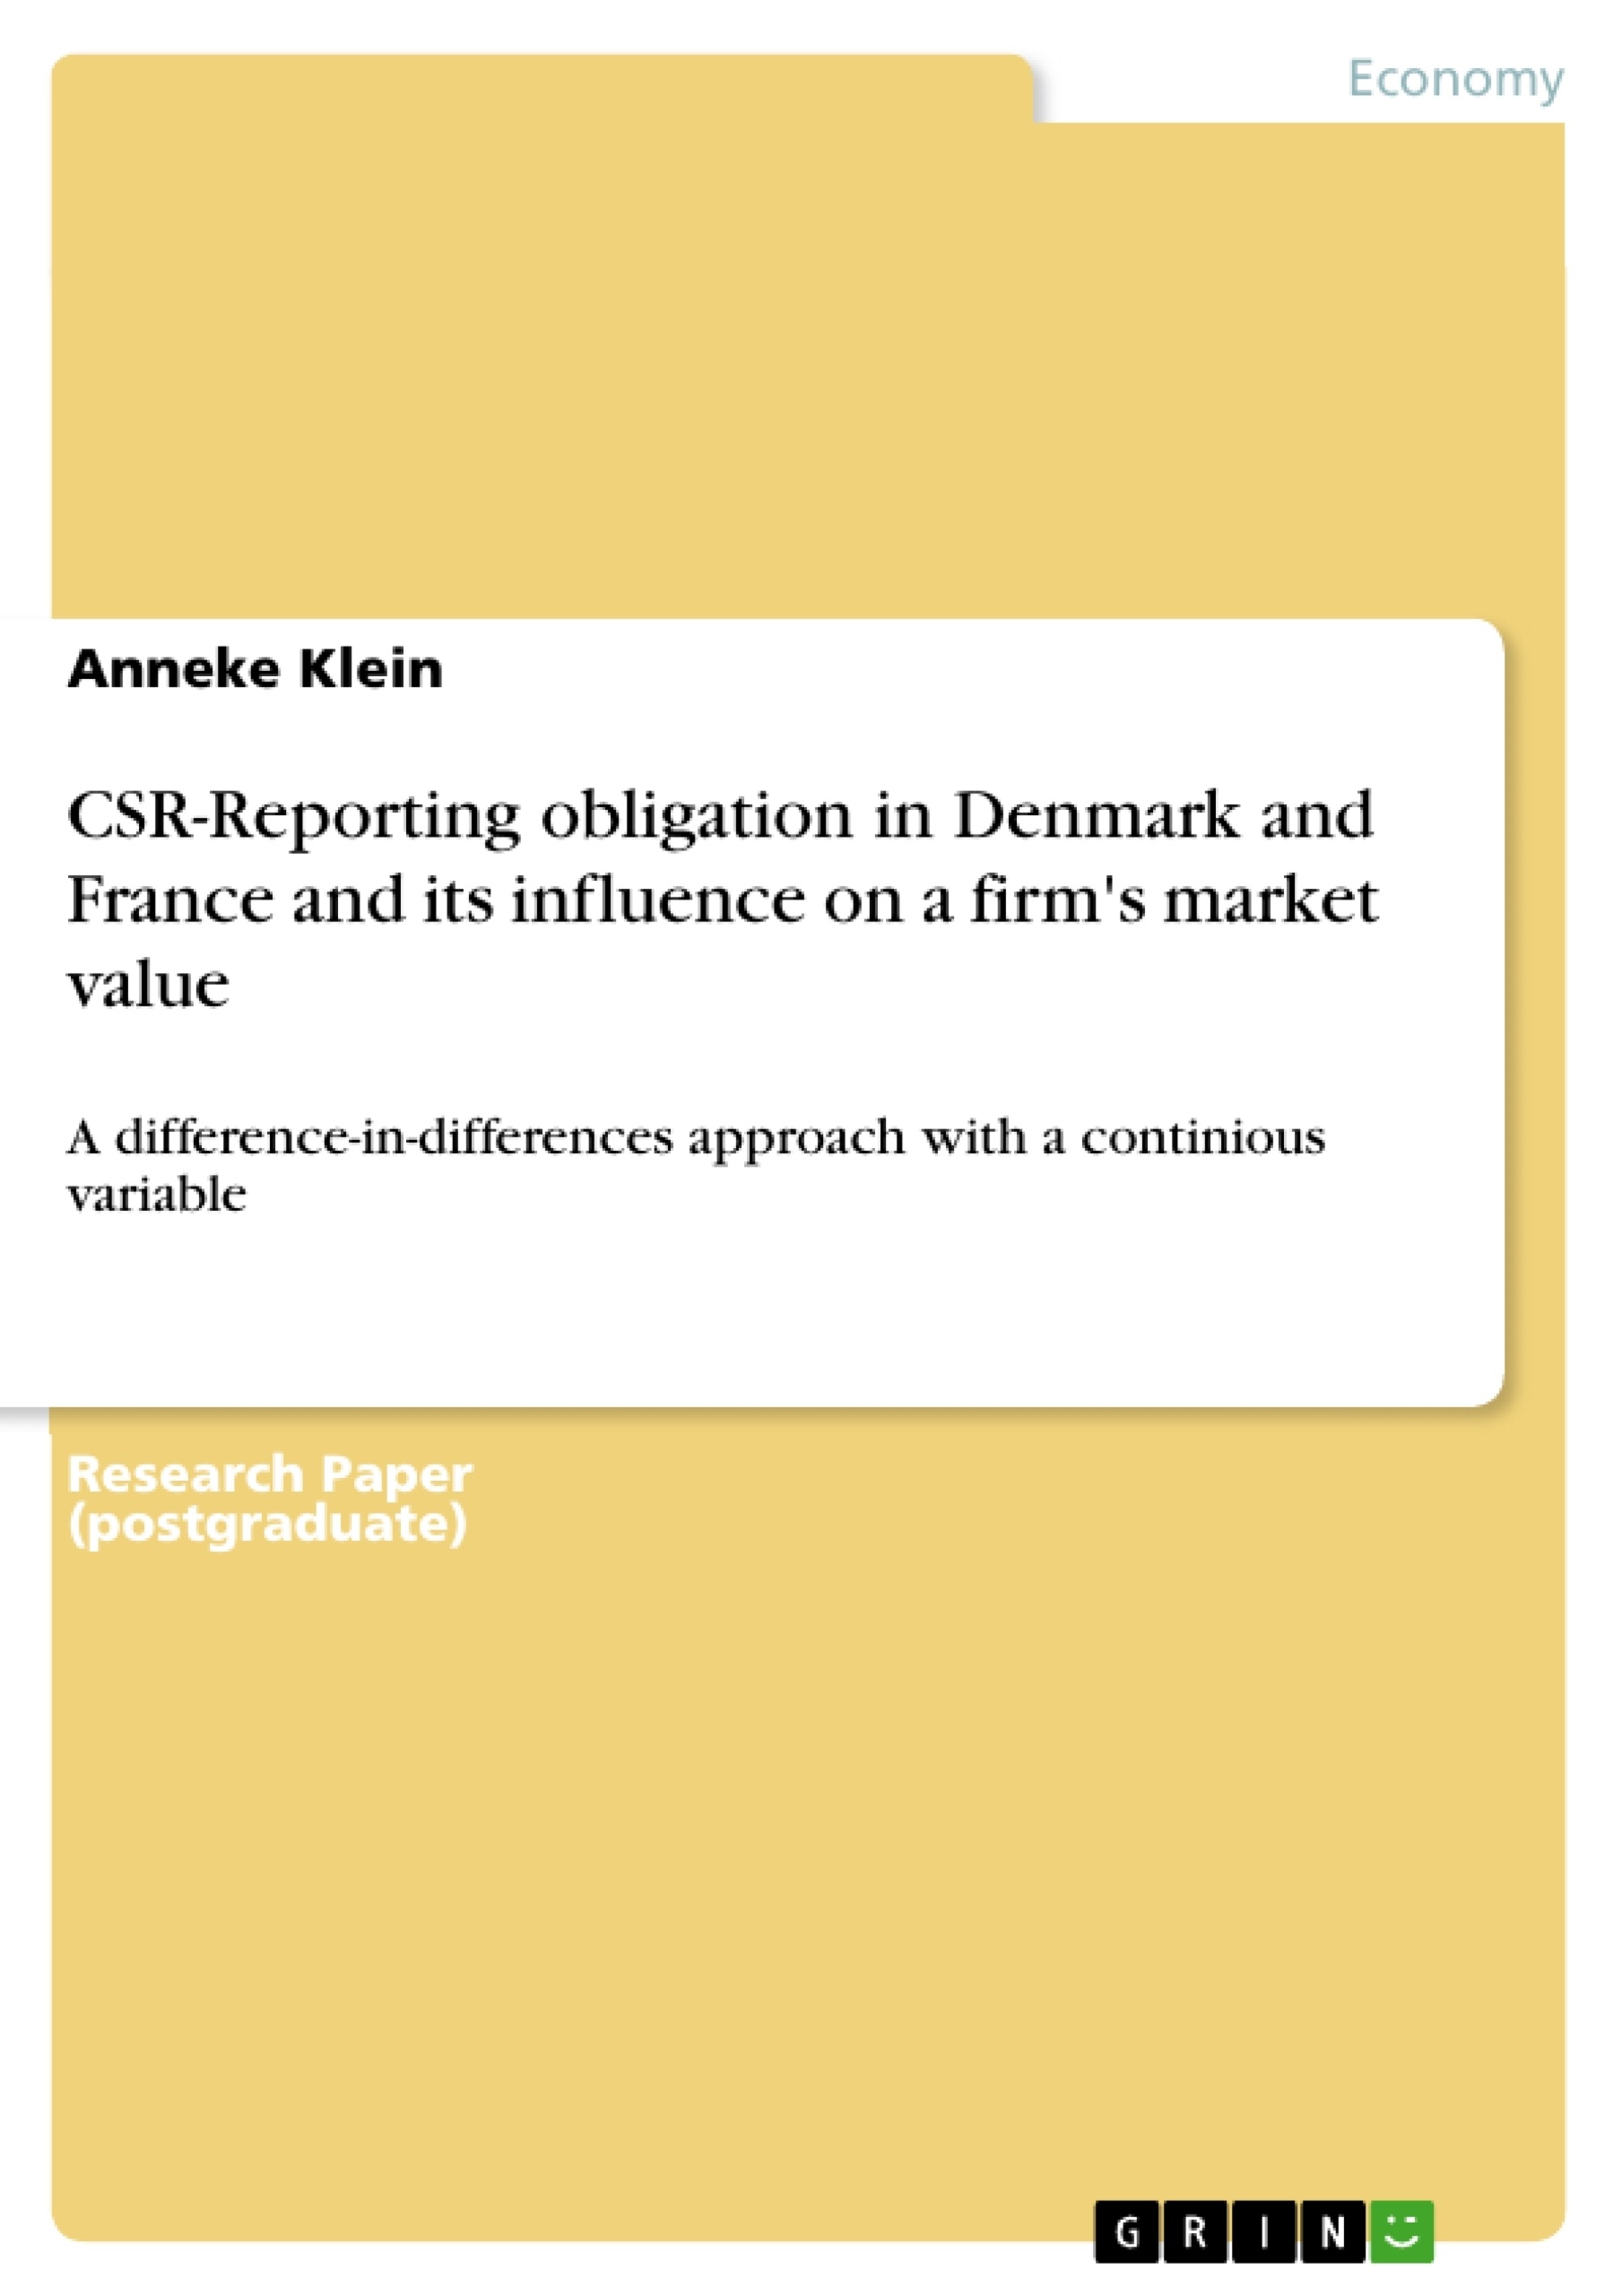 Título: CSR-Reporting obligation in Denmark and France and its influence on a firm's market value